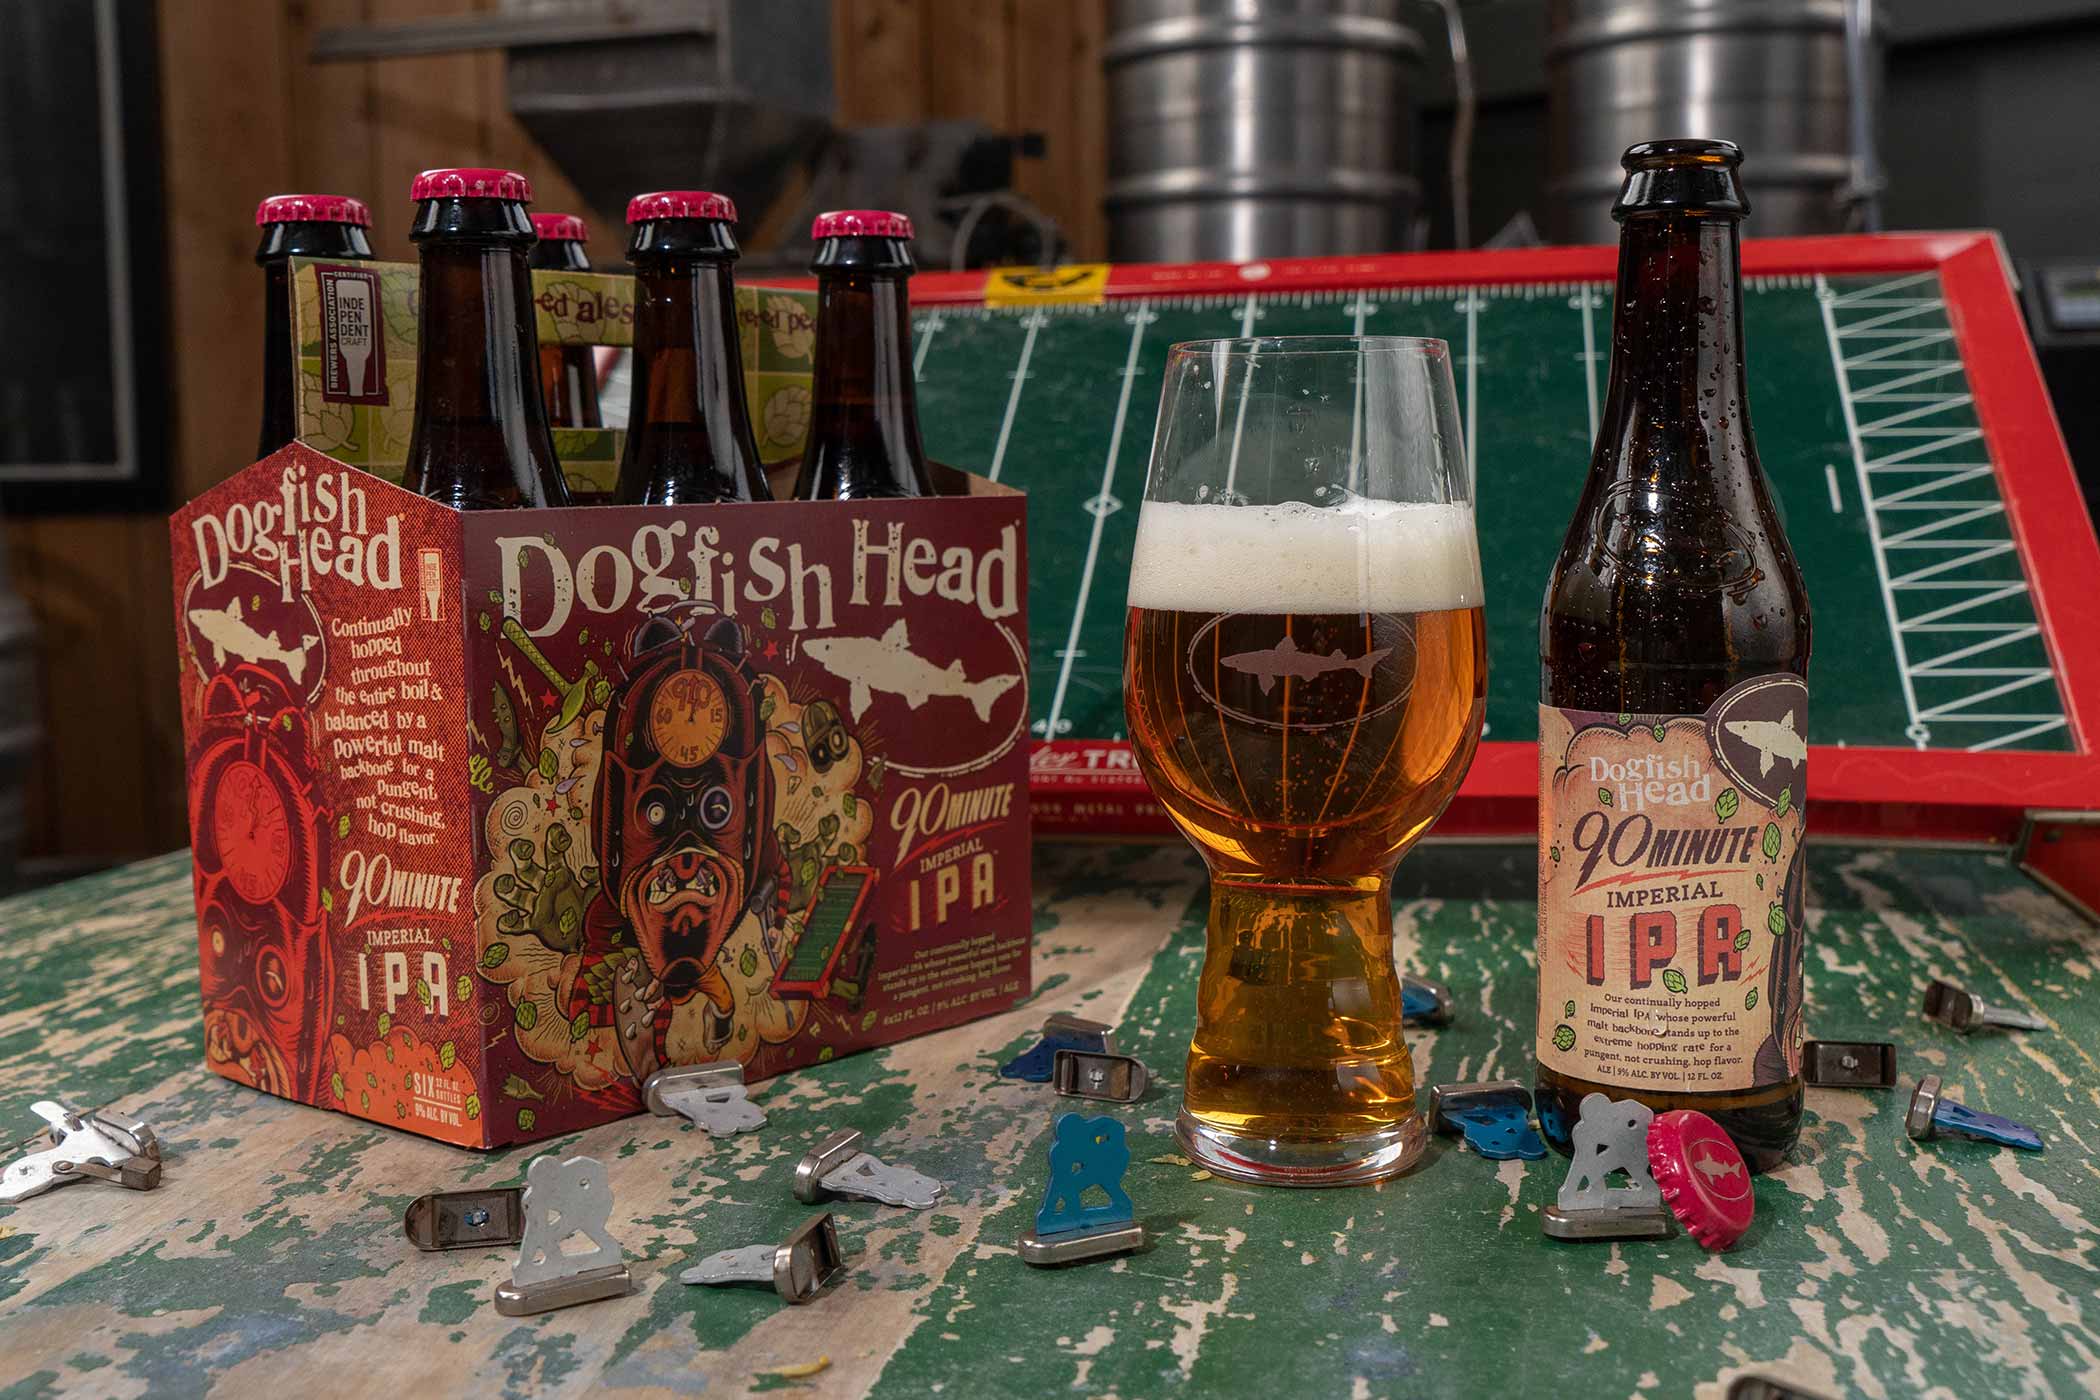 7 Things You Didn’t Know About Dogfish Head 90 Minute IPA